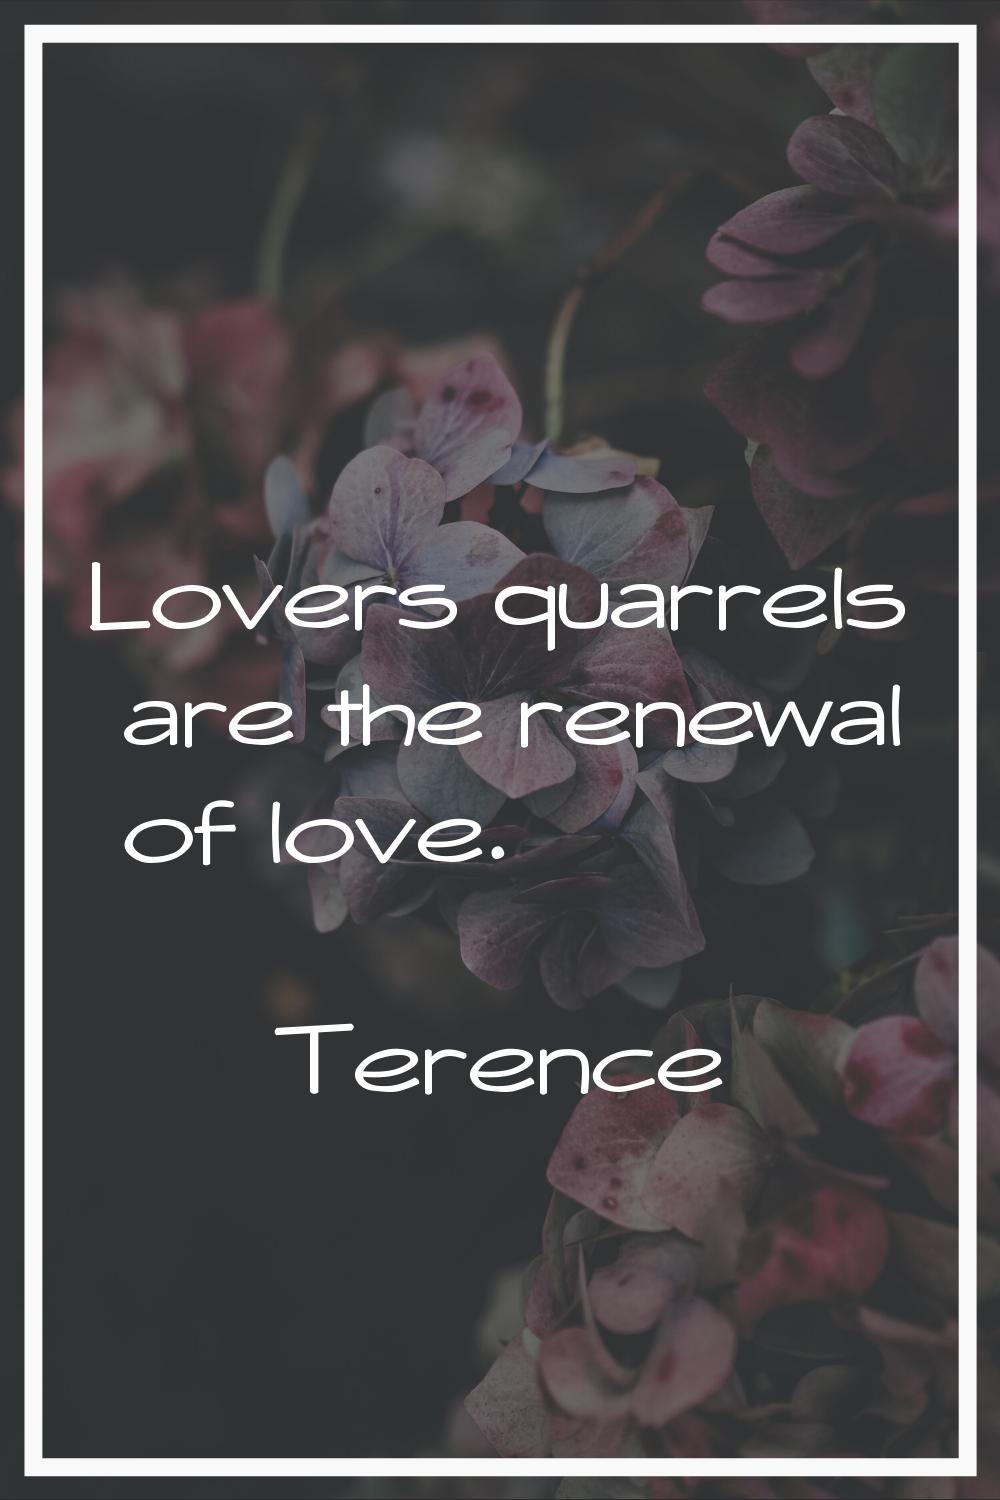 Lovers quarrels are the renewal of love.